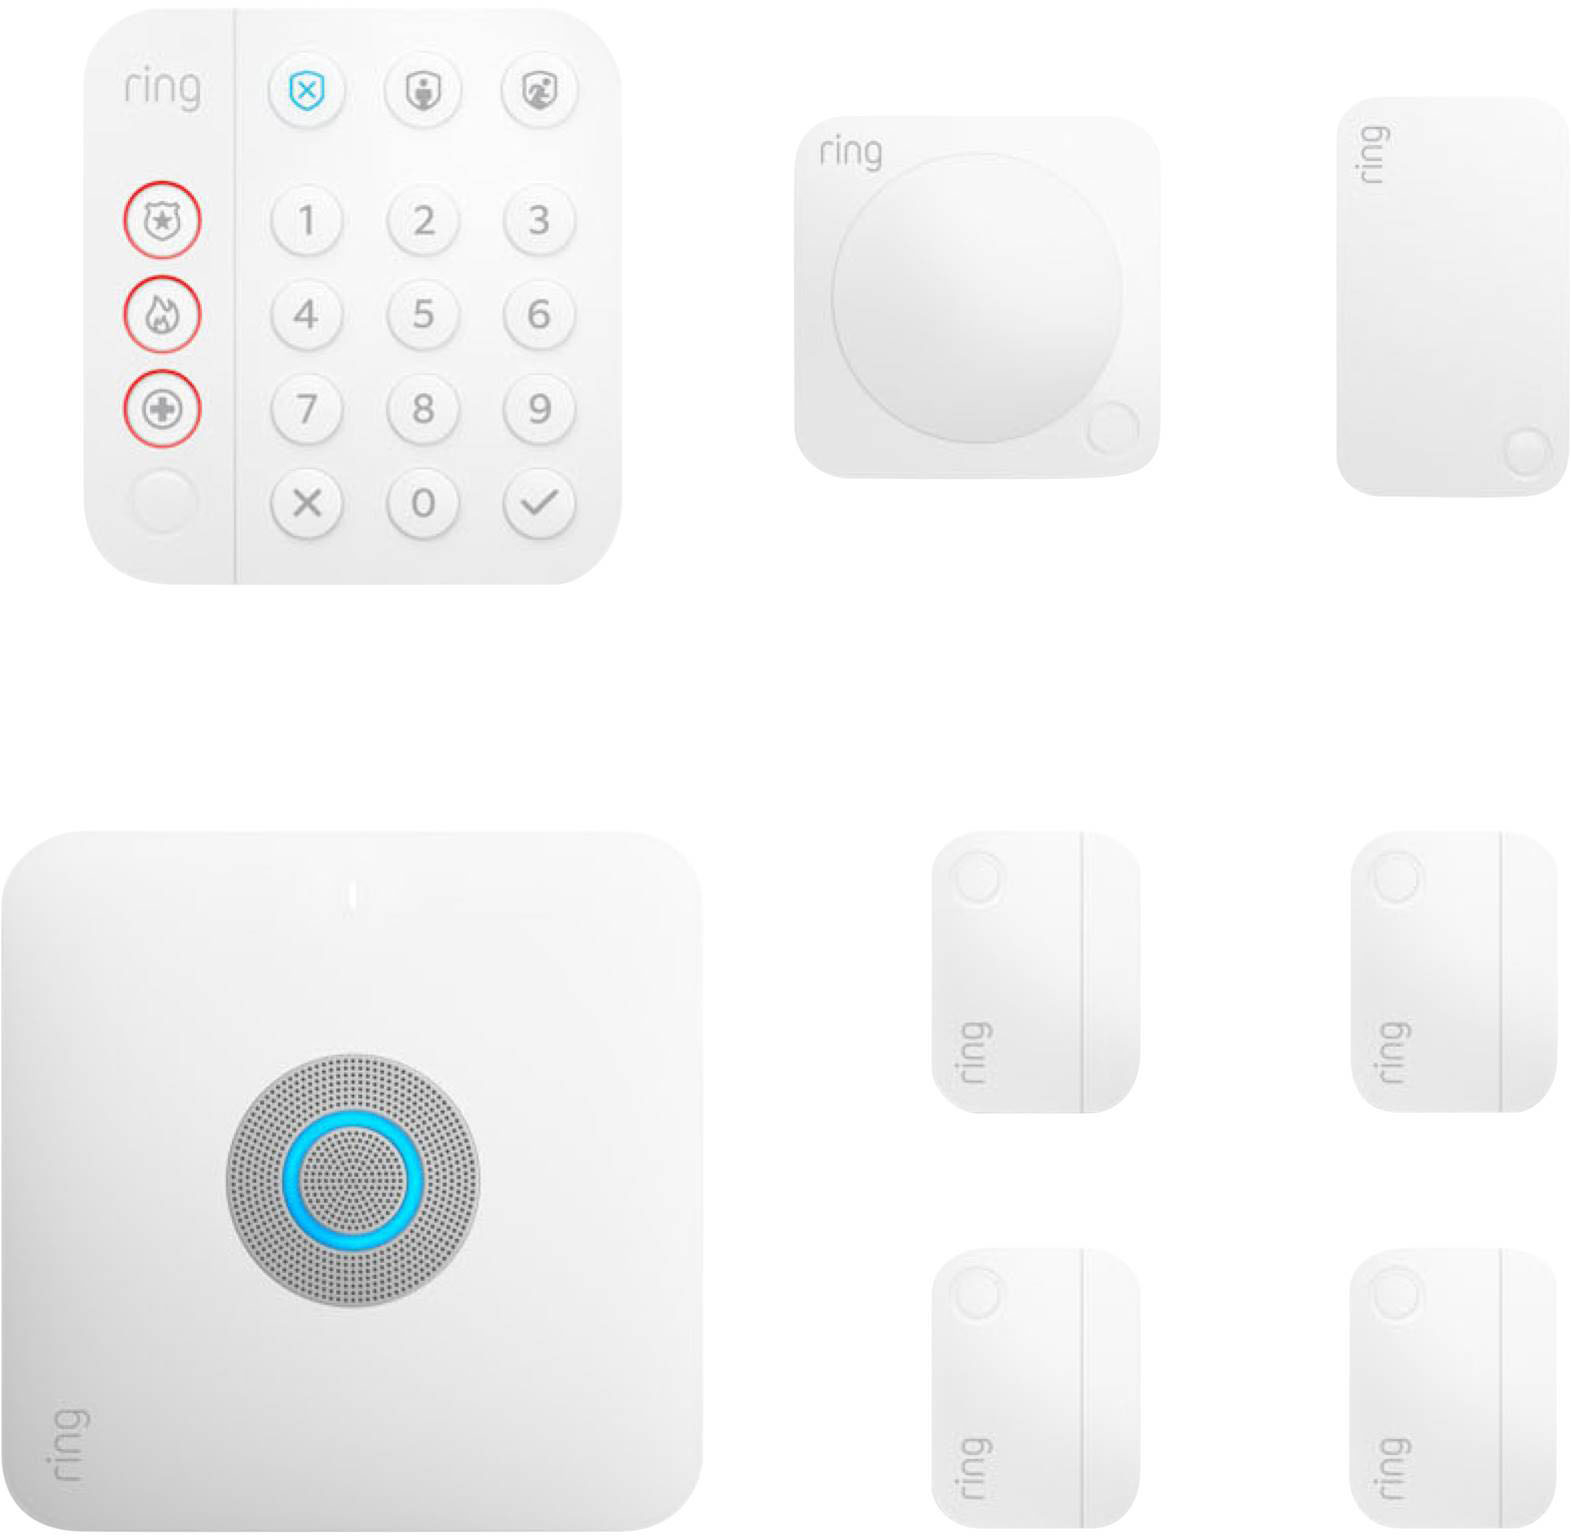 Ring Alarm review: simple, affordable home security system